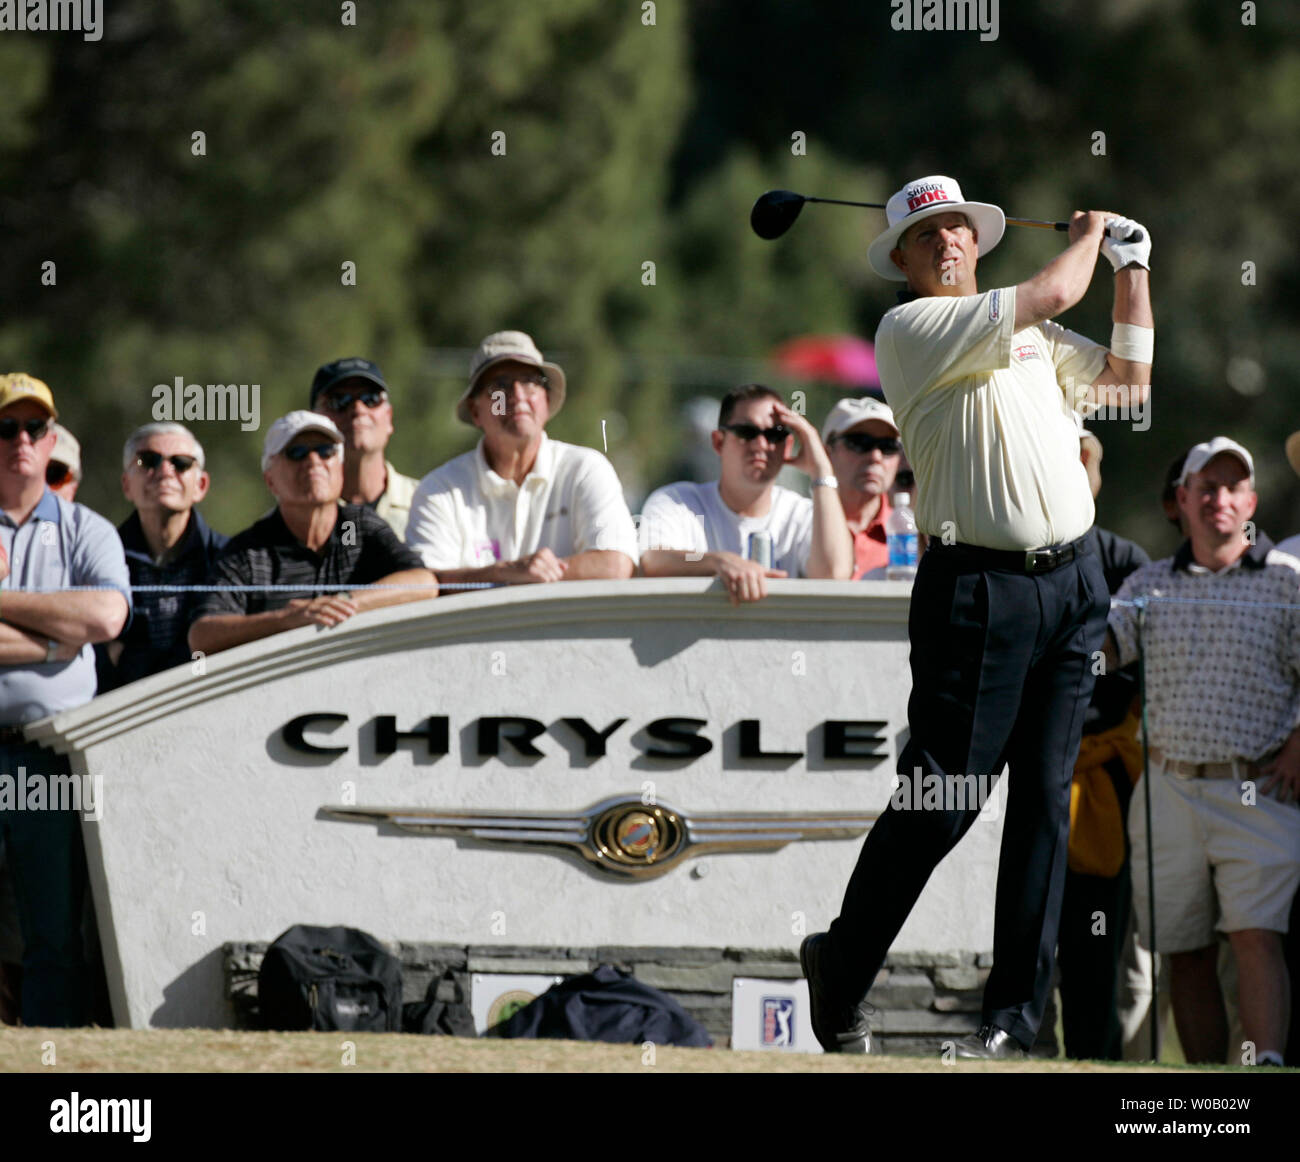 Kirk Triplett hits his tee shot on the 18th hole in the final round of the Chrysler Open in Tucson, Arizona February 26, 2006. Triplett won the tournament by one shot and started the day six shots off the lead.      (UPI Photo/Will Powers) Stock Photo